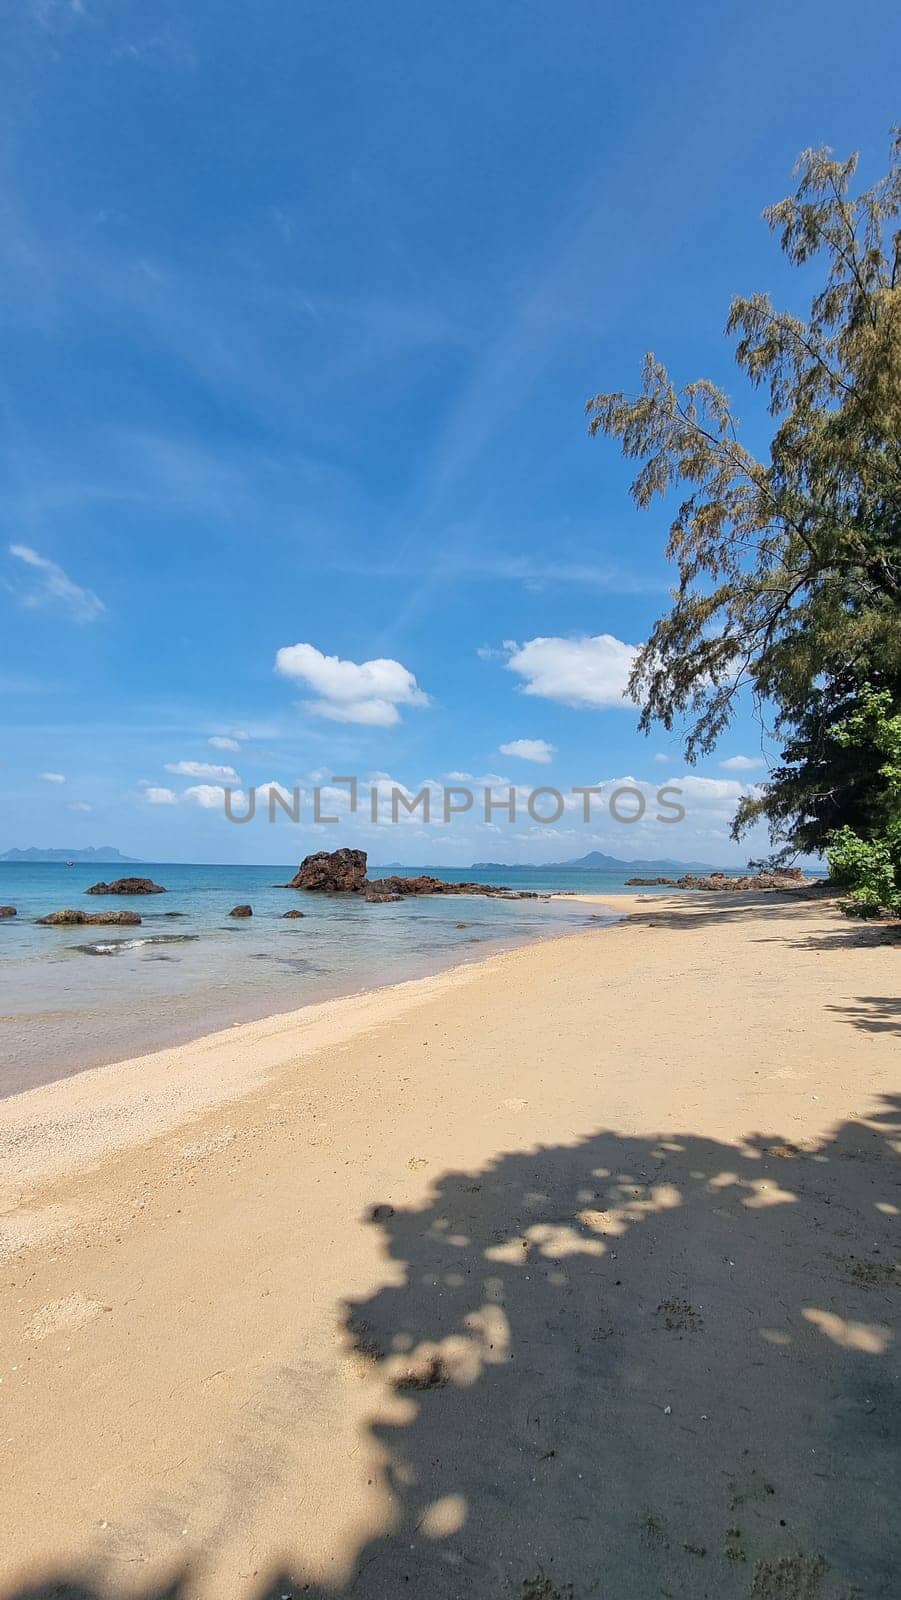 A tranquil sandy beach meets the vast ocean under a clear blue sky, creating a picturesque setting where waves gently kiss the shore.Koh Libong Thailand